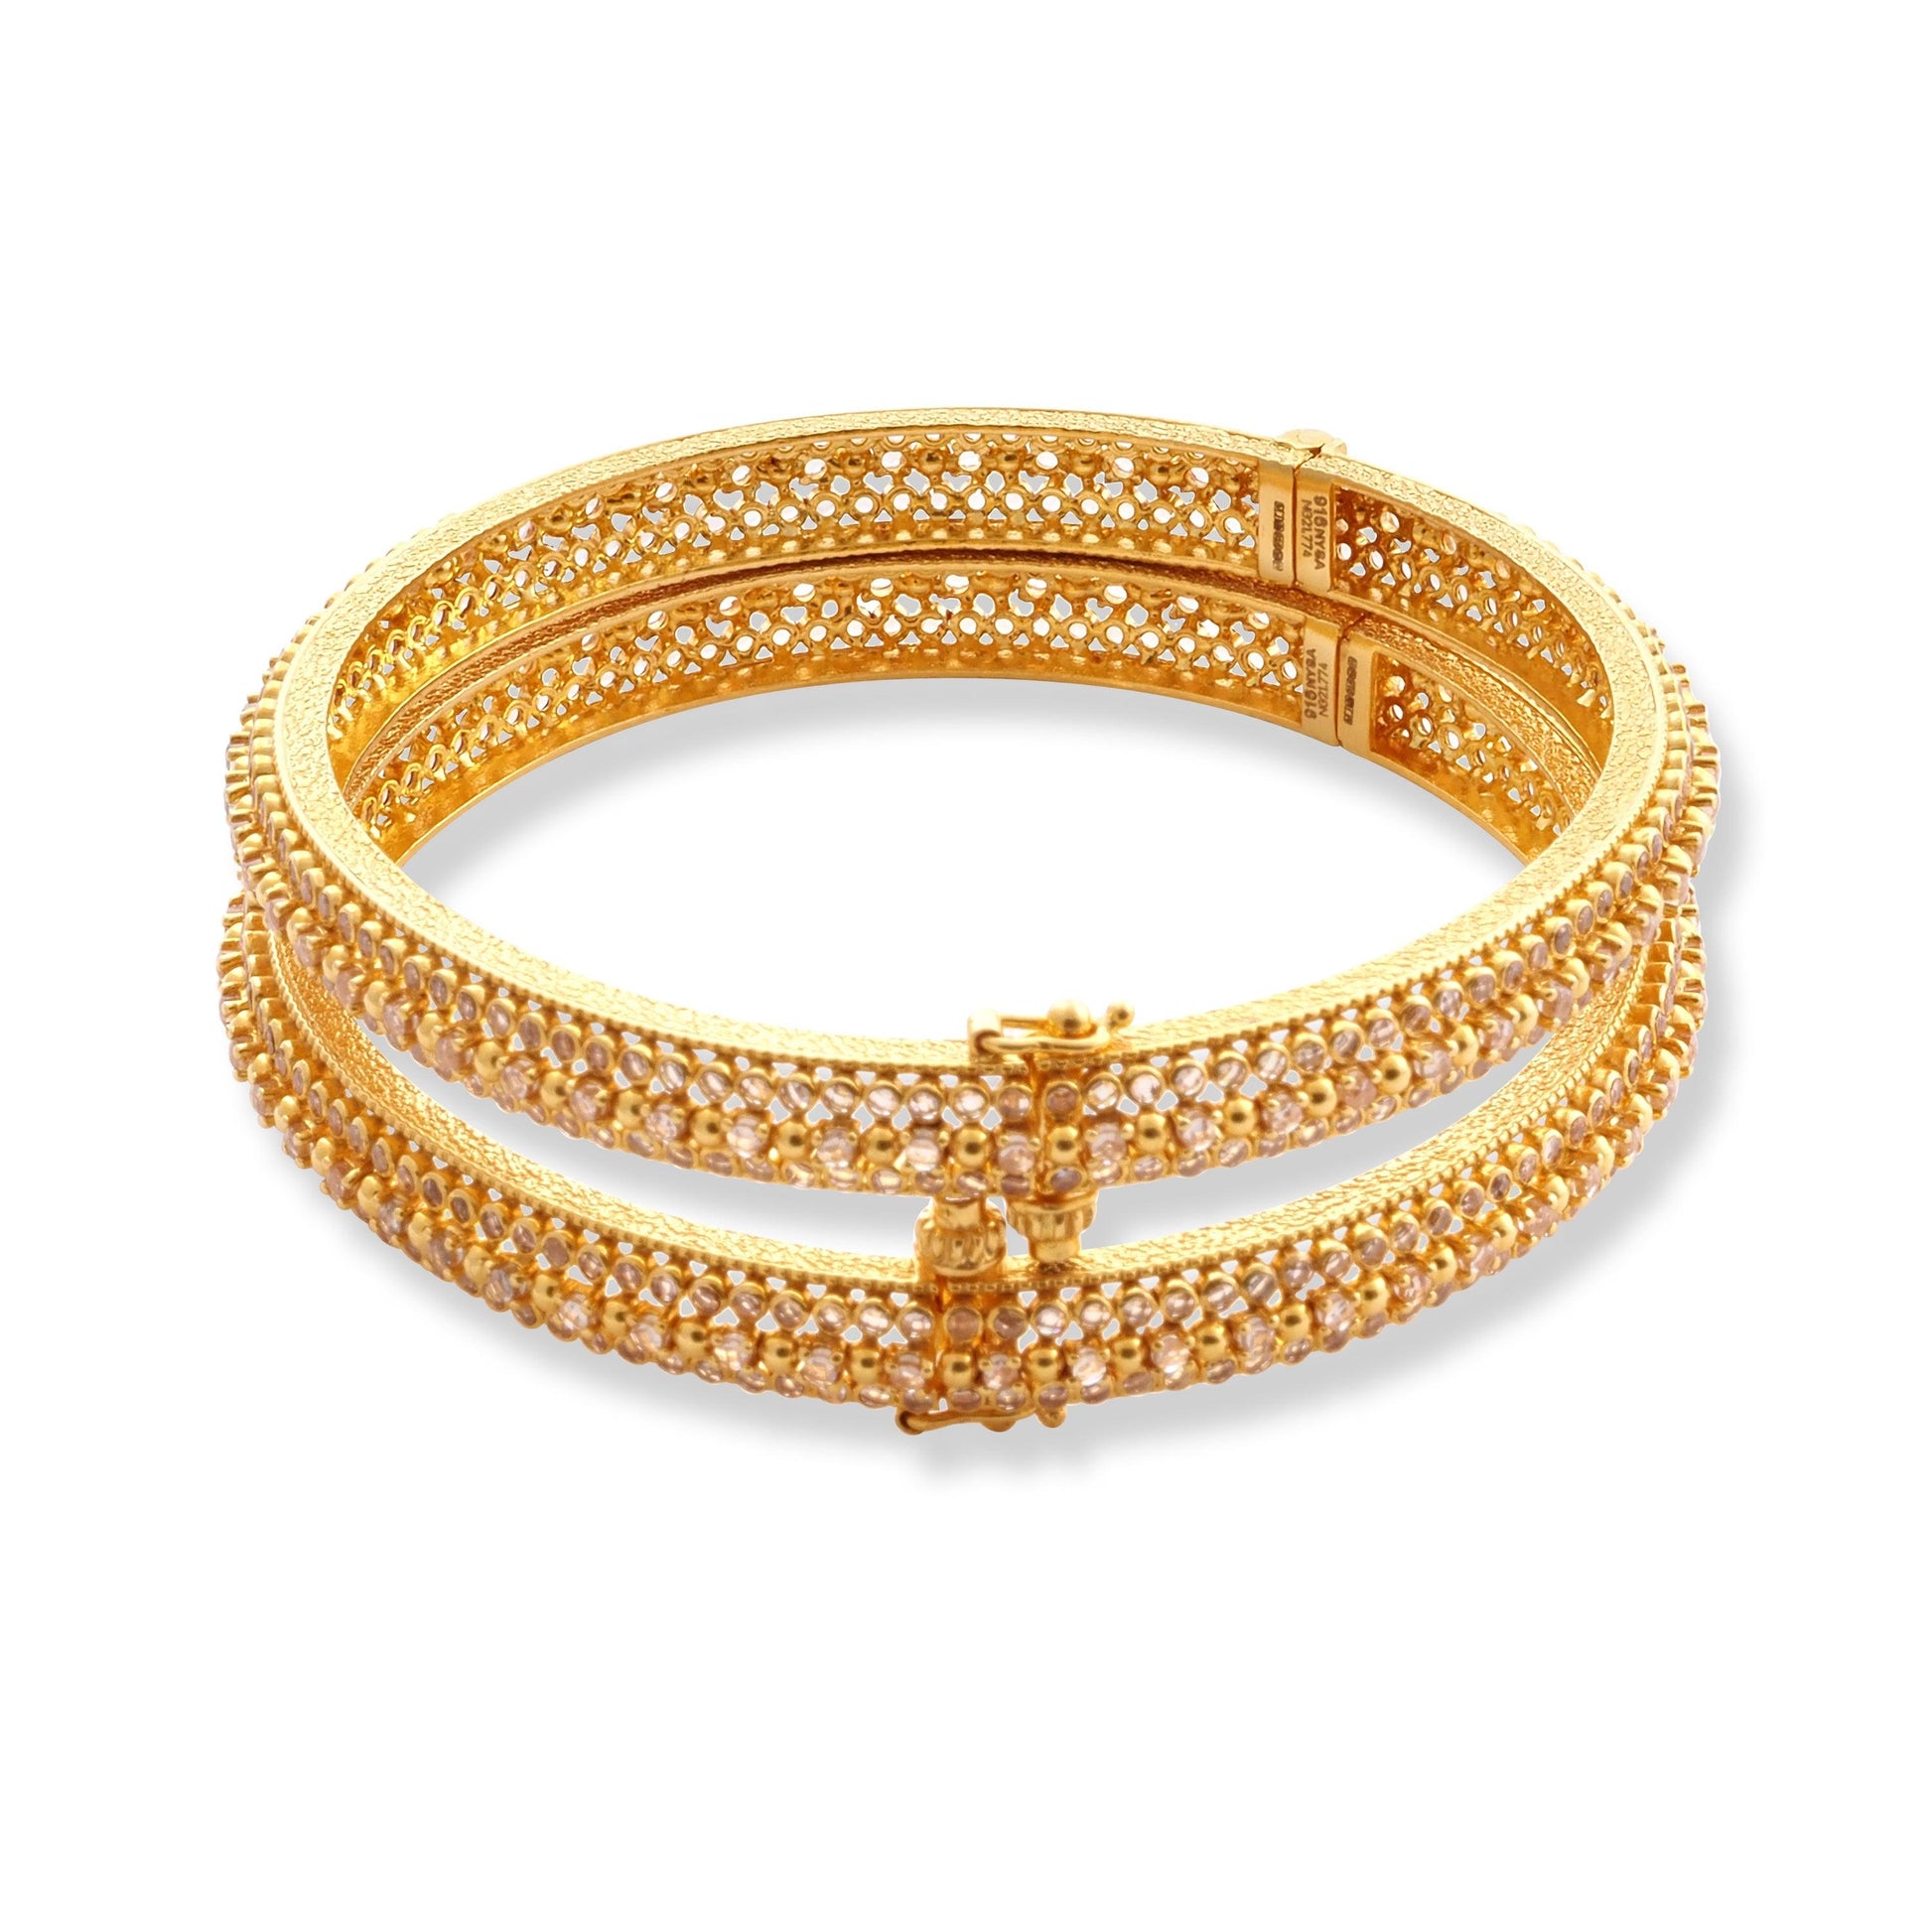 Pair of 22ct Bangles in Hinge & Openable Screw Fitting with Cubic Zirconia B-8589 - Minar Jewellers